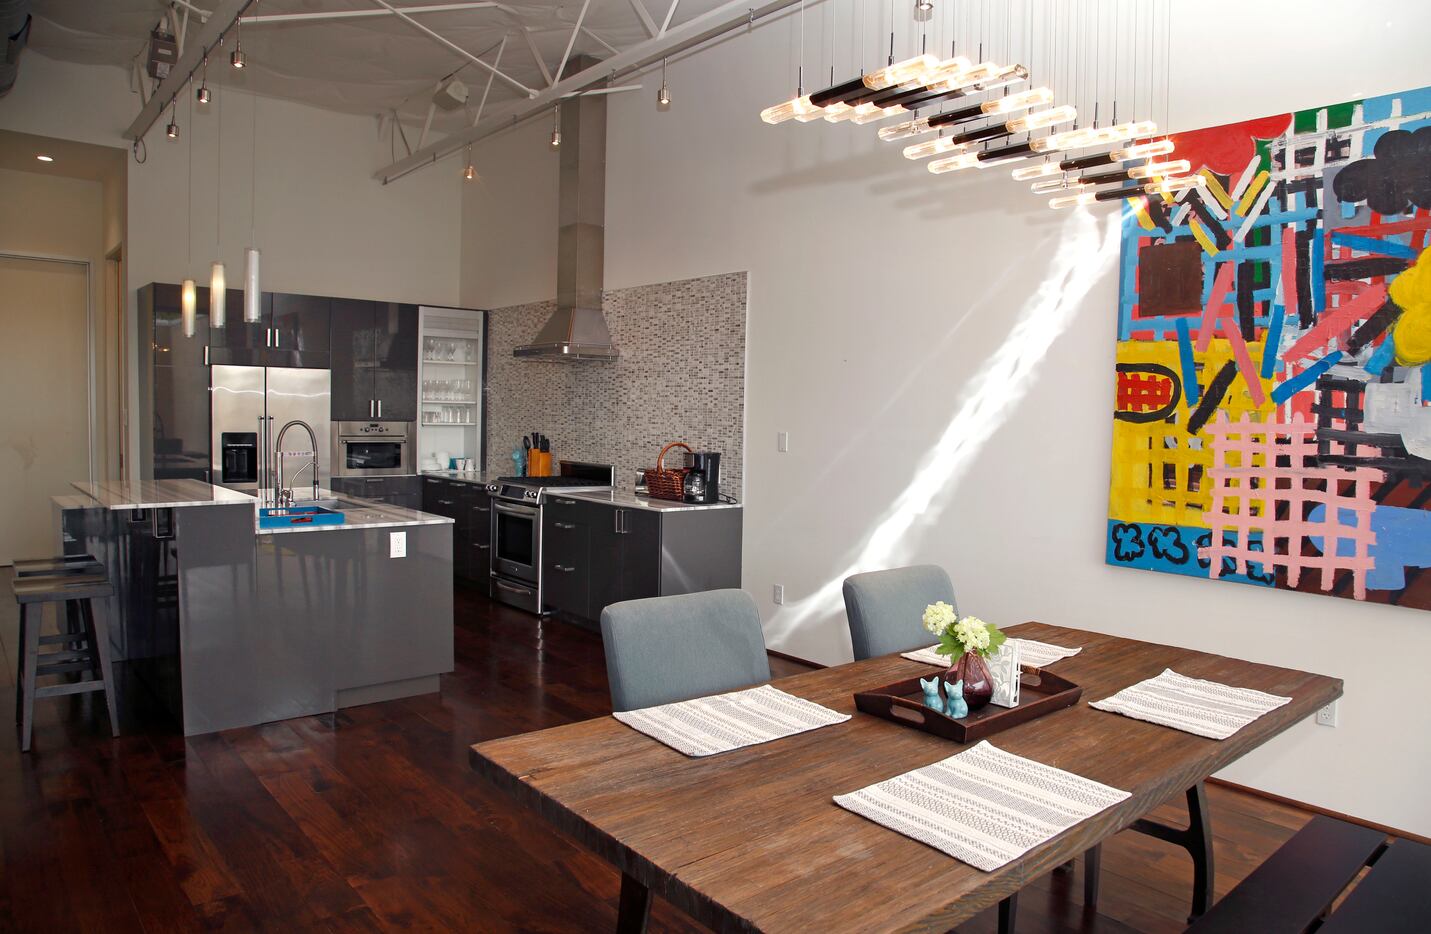 The kitchen and dining area in one of the Vantage Street loft homes in Dallas' Design District.